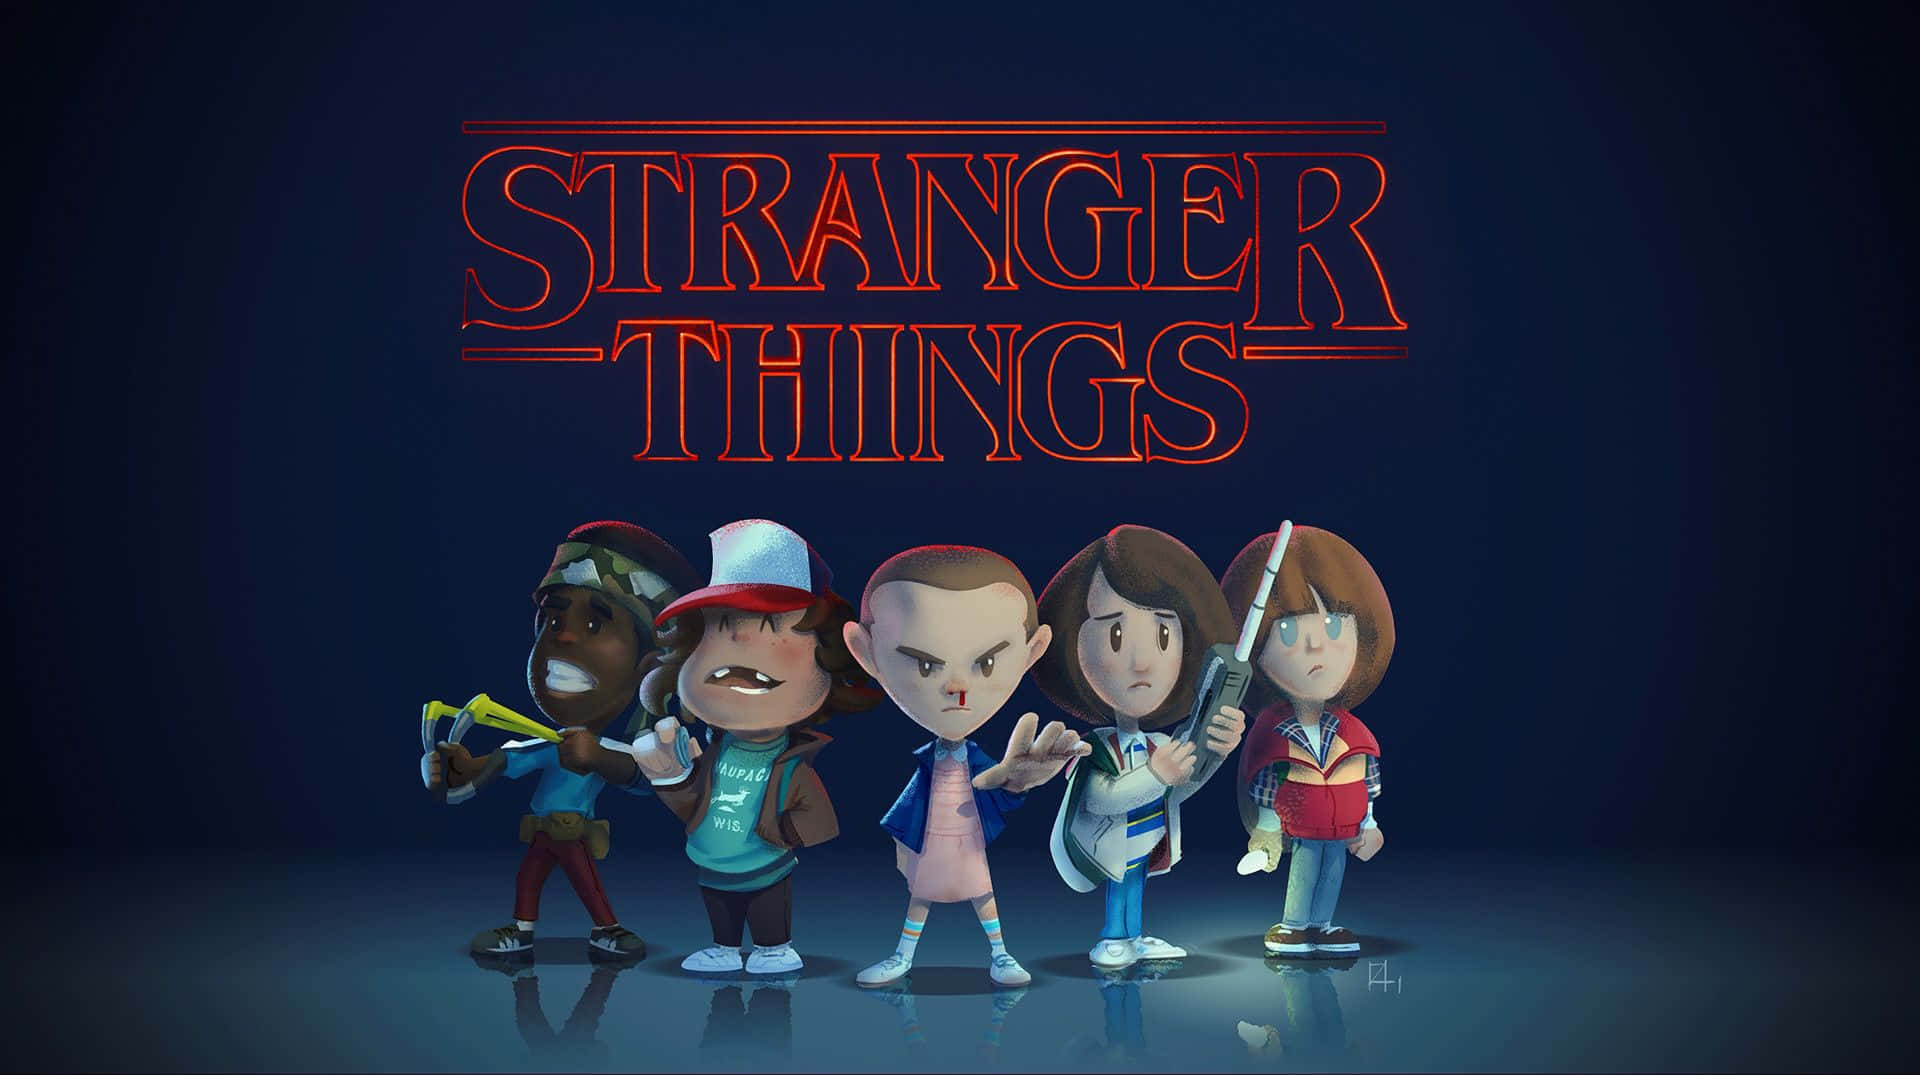 Enter the Upside Down with Stranger Things